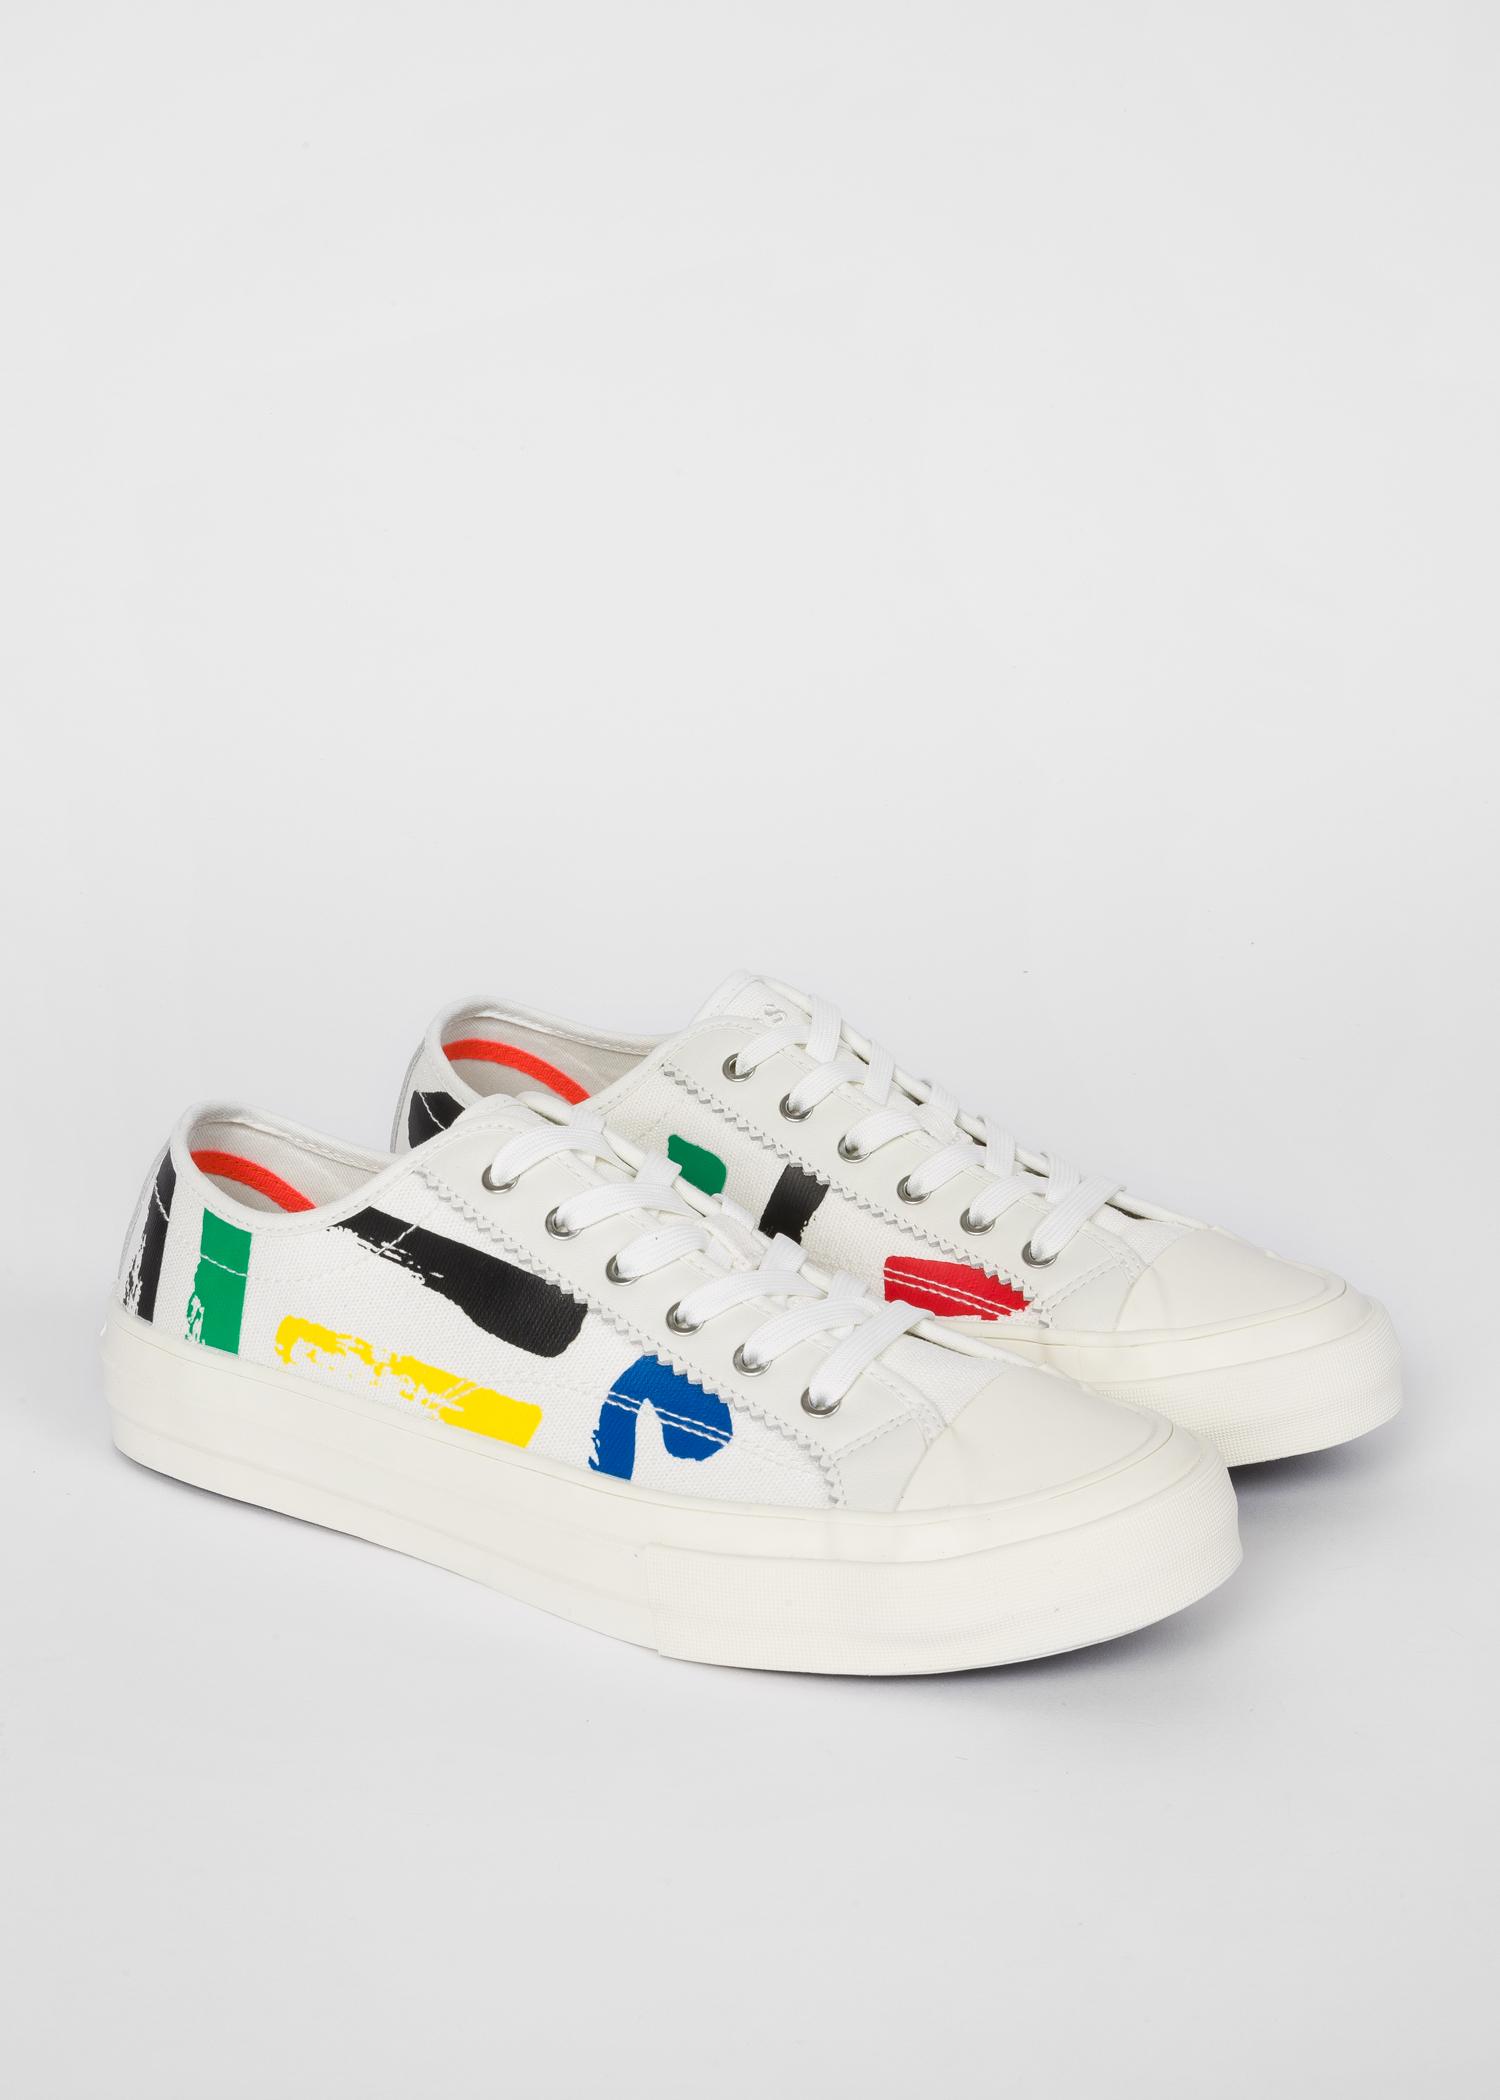 paul smith canvas trainers